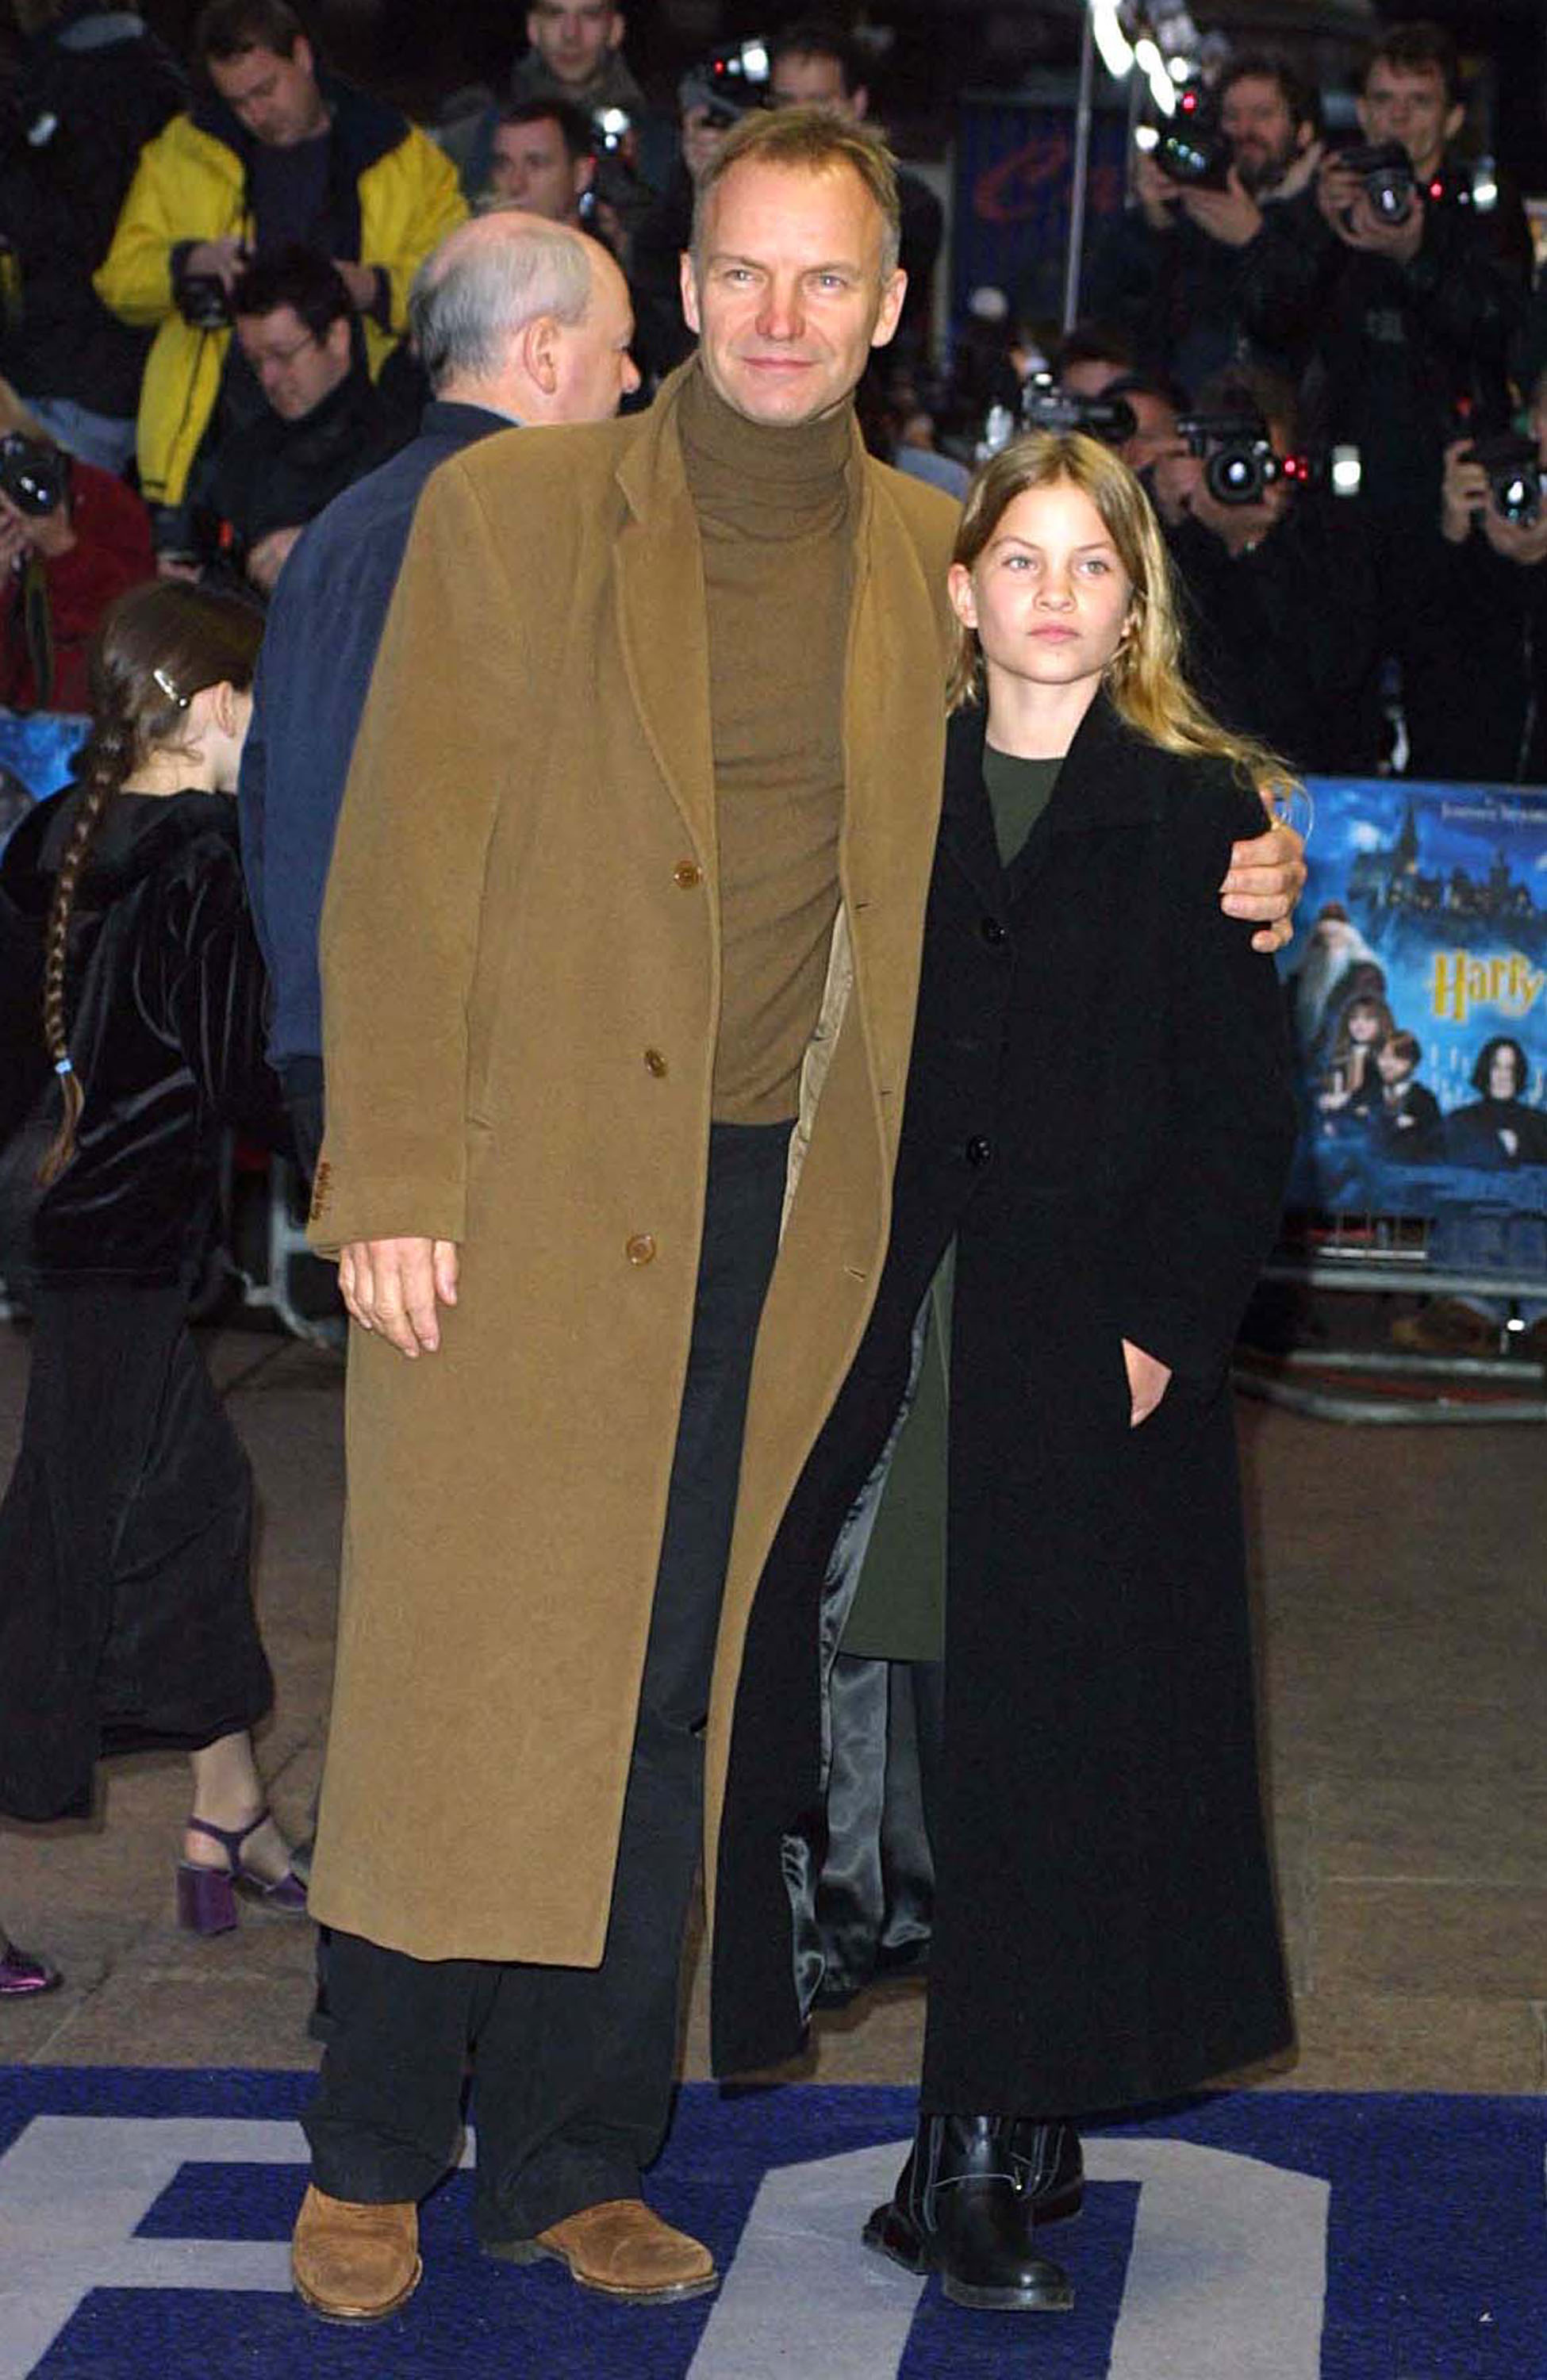 Sting and his child Eliot Sumner attend the world premiere of "Harry Potter and the Philosopher's Stone" on November 4, 2001 in London, England | Source: Getty Images